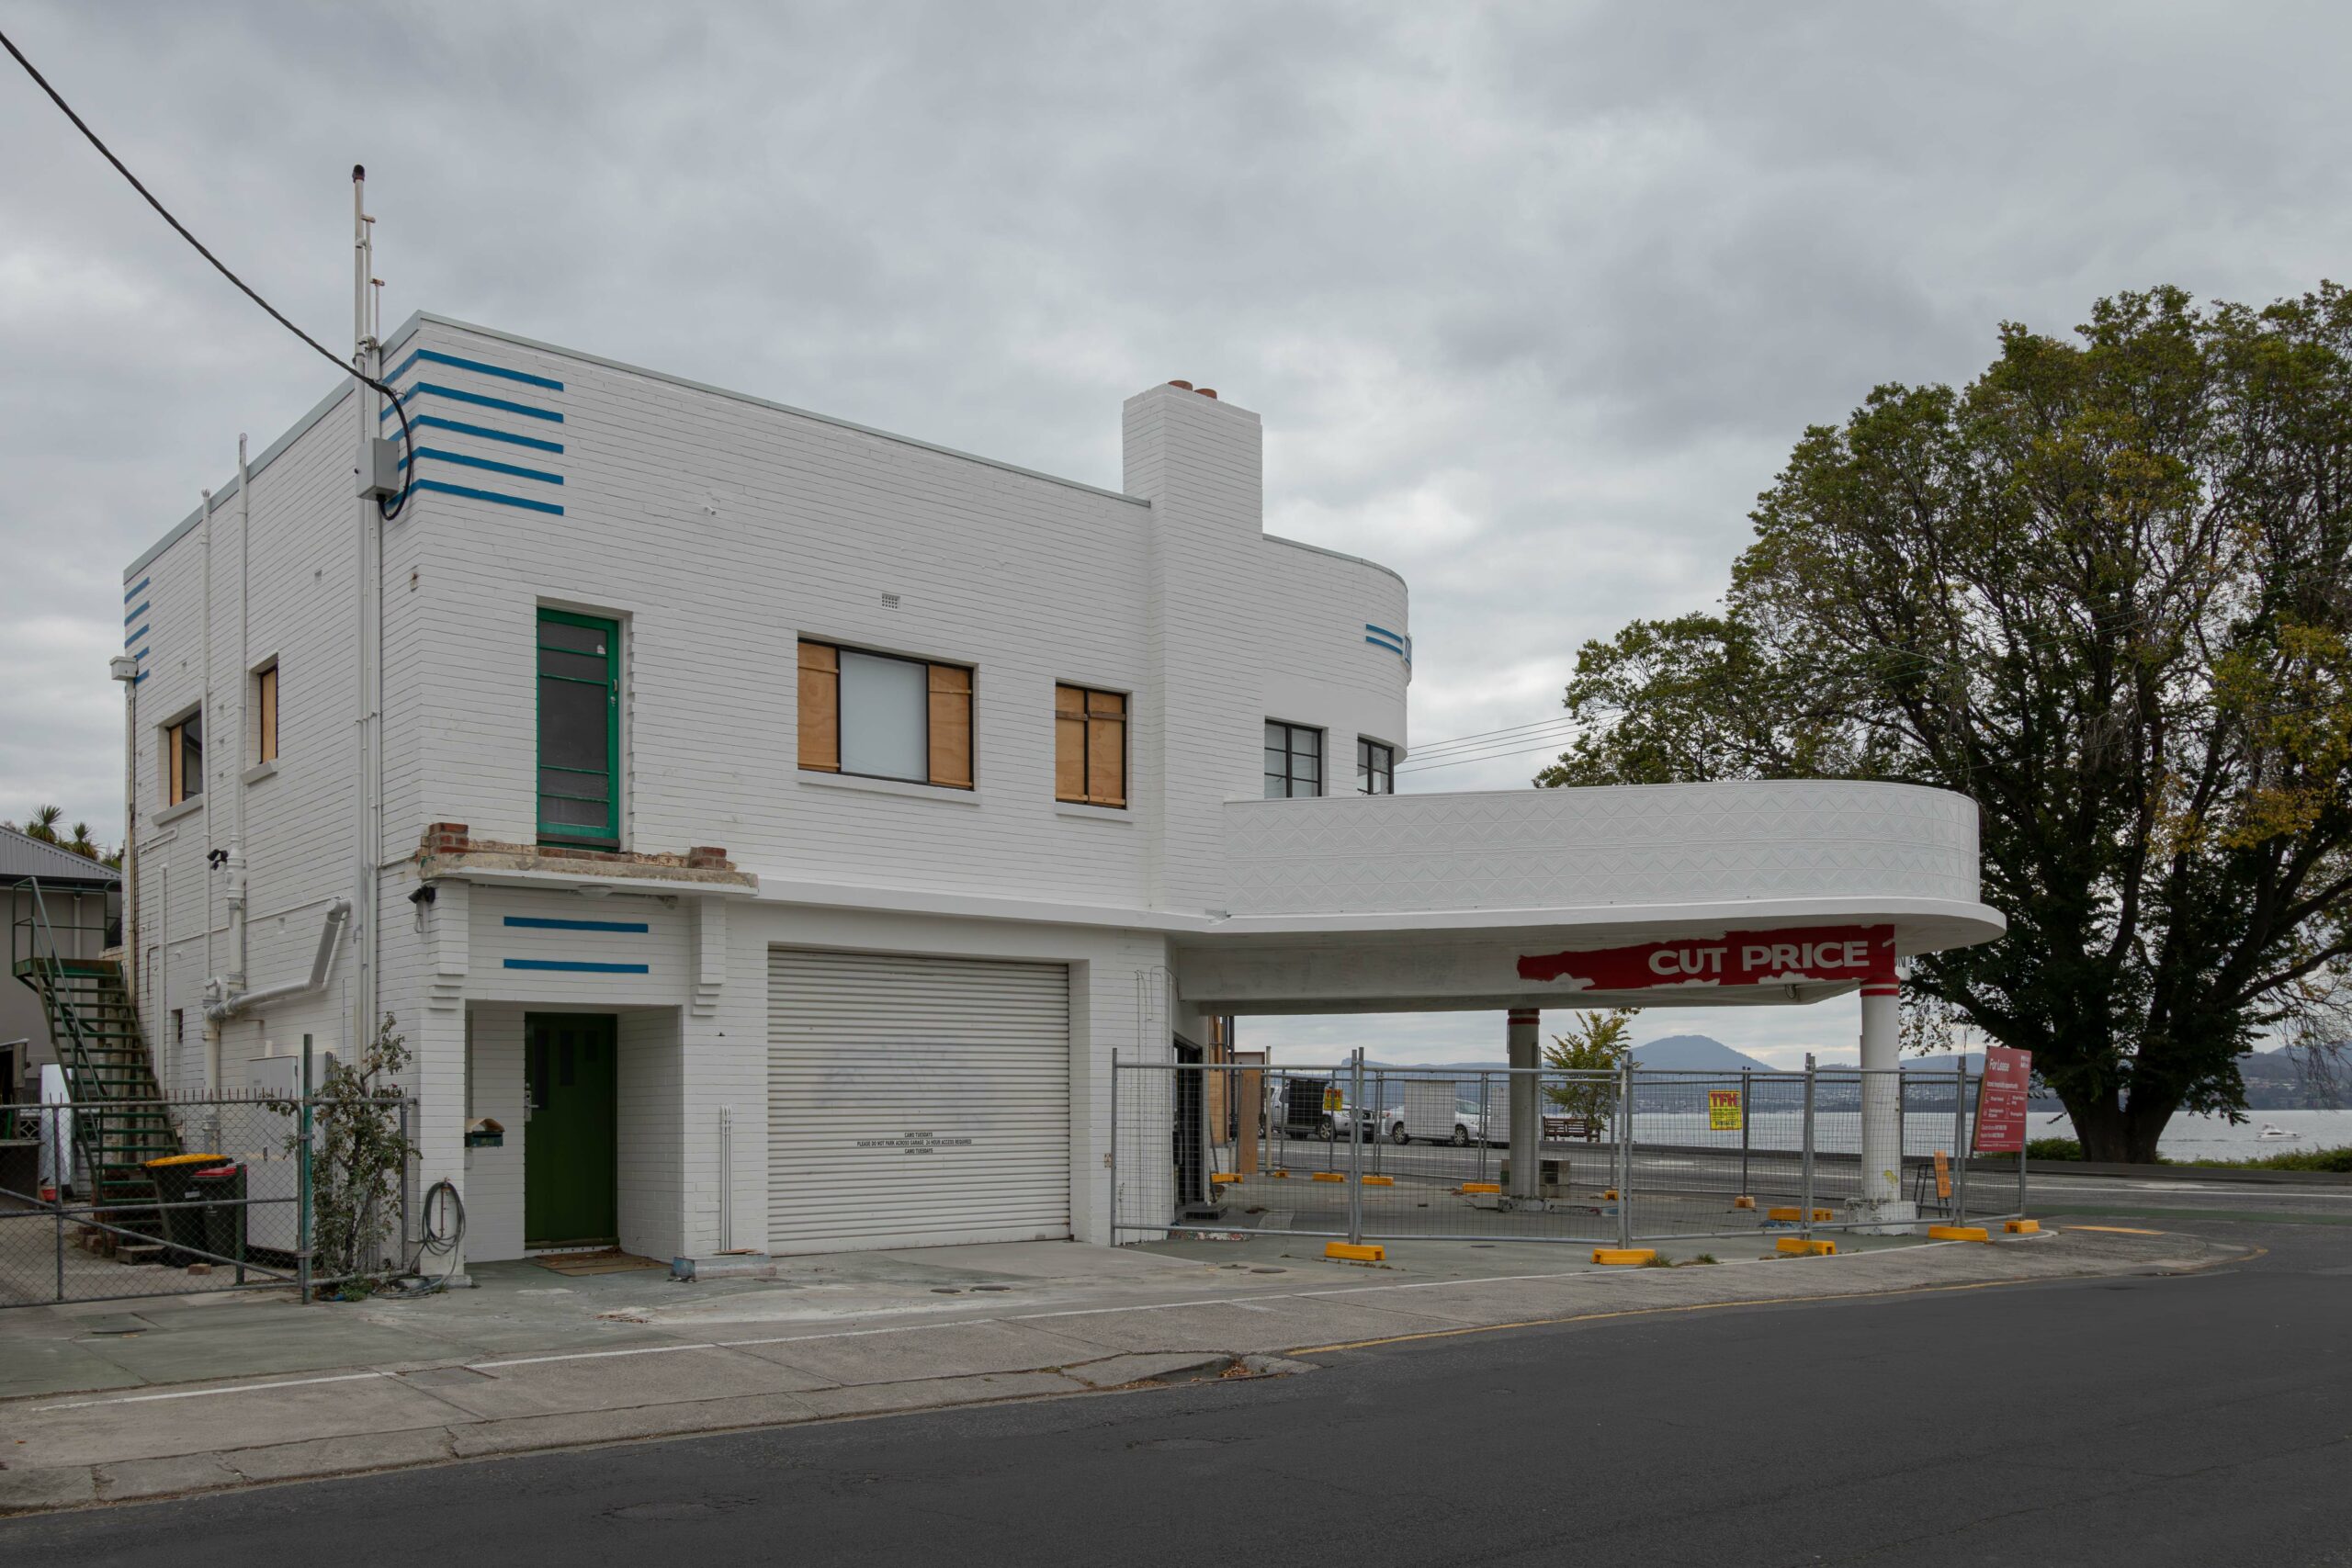 Side view of an art deco service station painted white. The first floor windows are boarded up